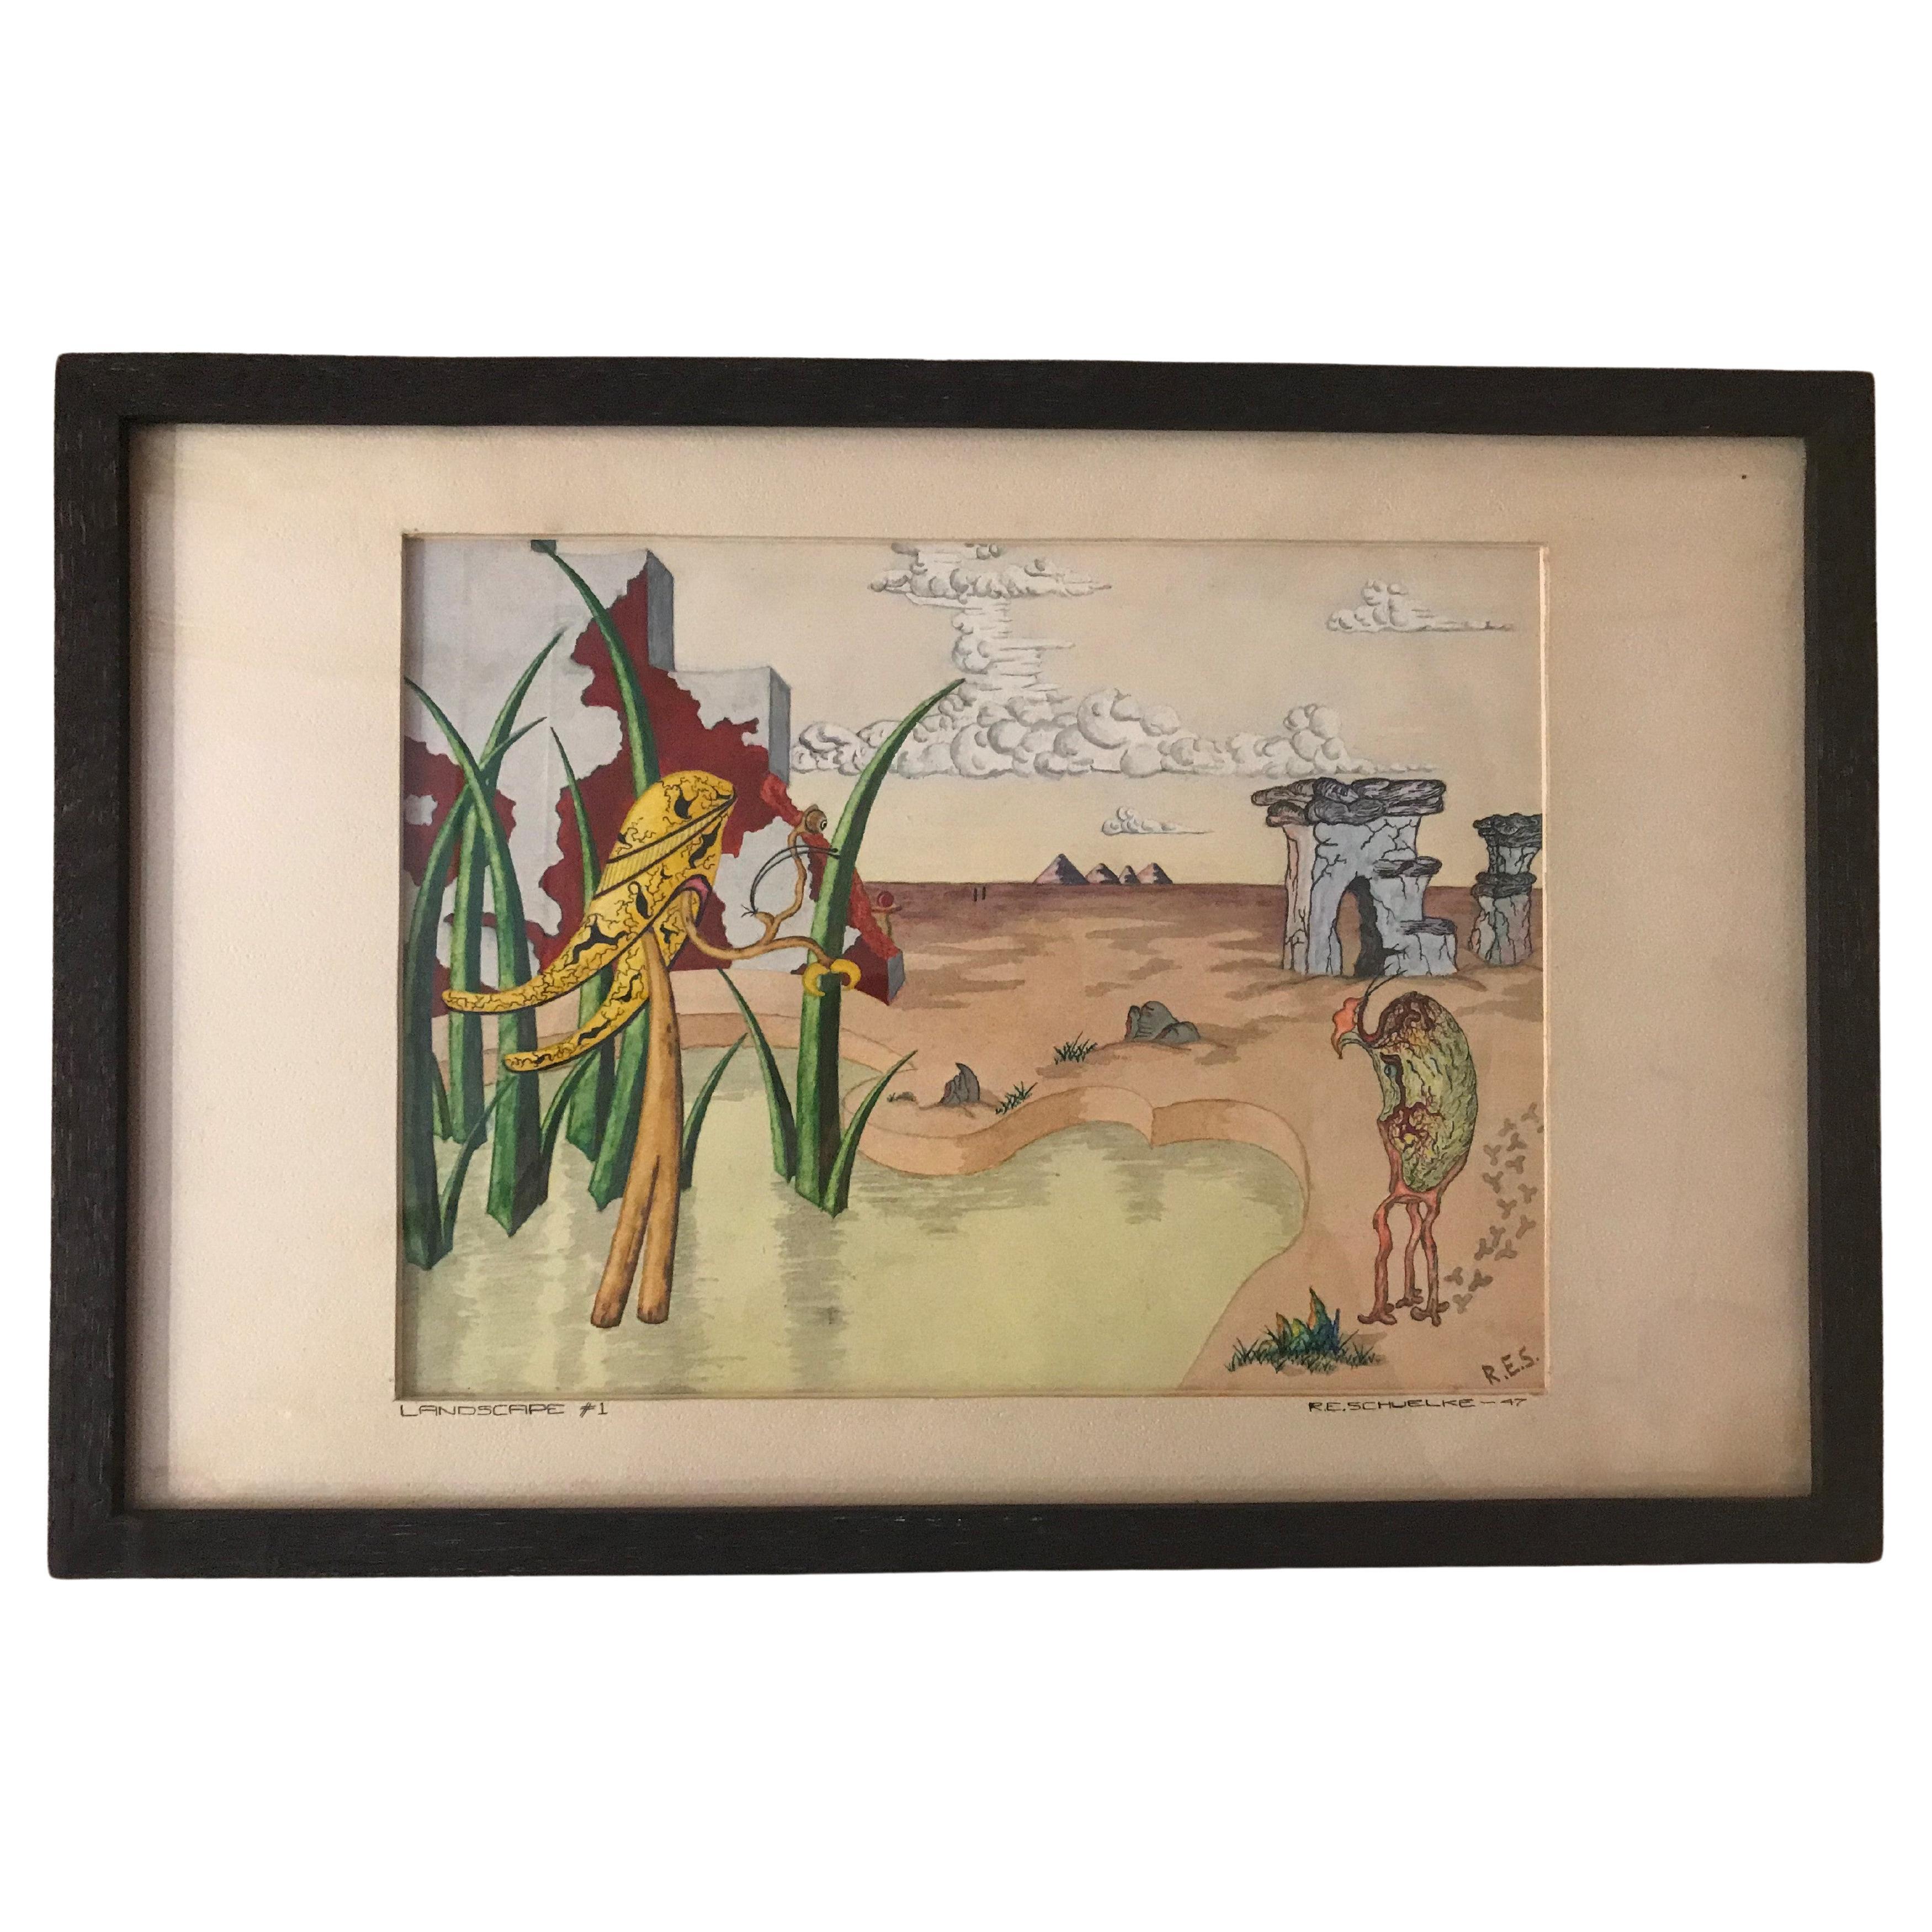 Surrealist Landscape Watercolor Signed R. E. Schwelke and Dated 1947 For Sale